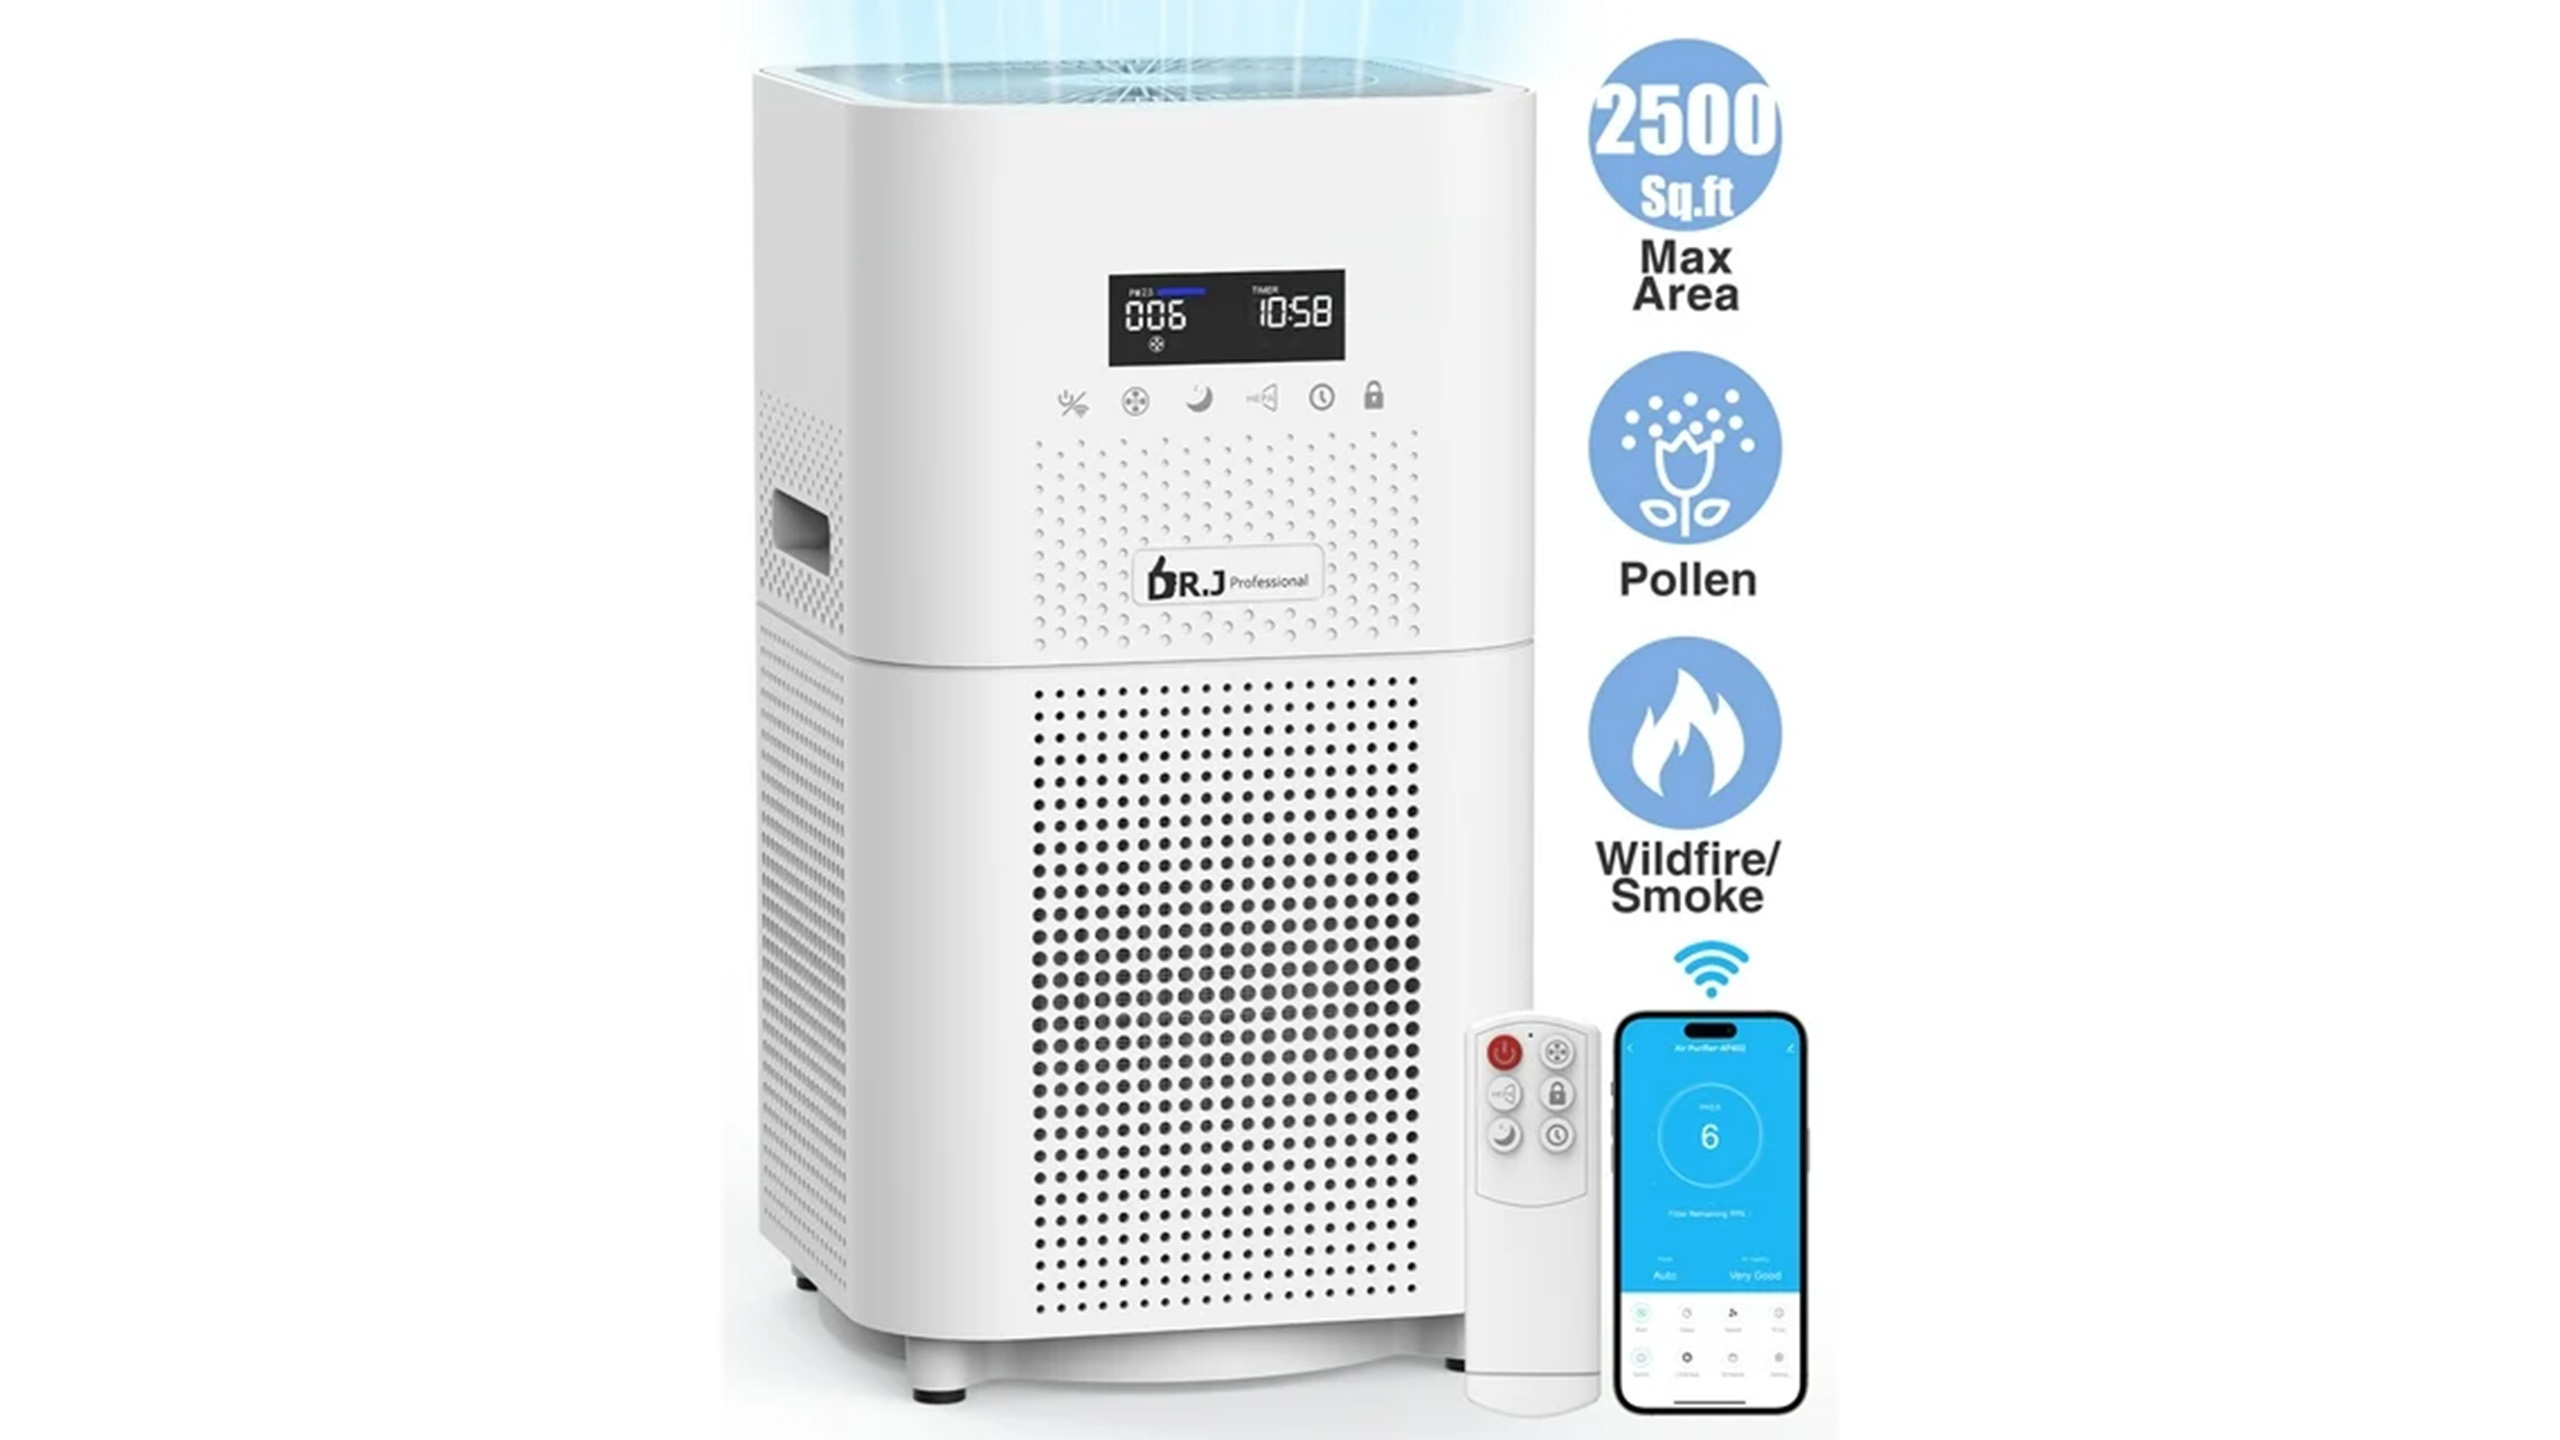 Save more than 50% on this Wi-Fi-enabled air purifier at Walmart